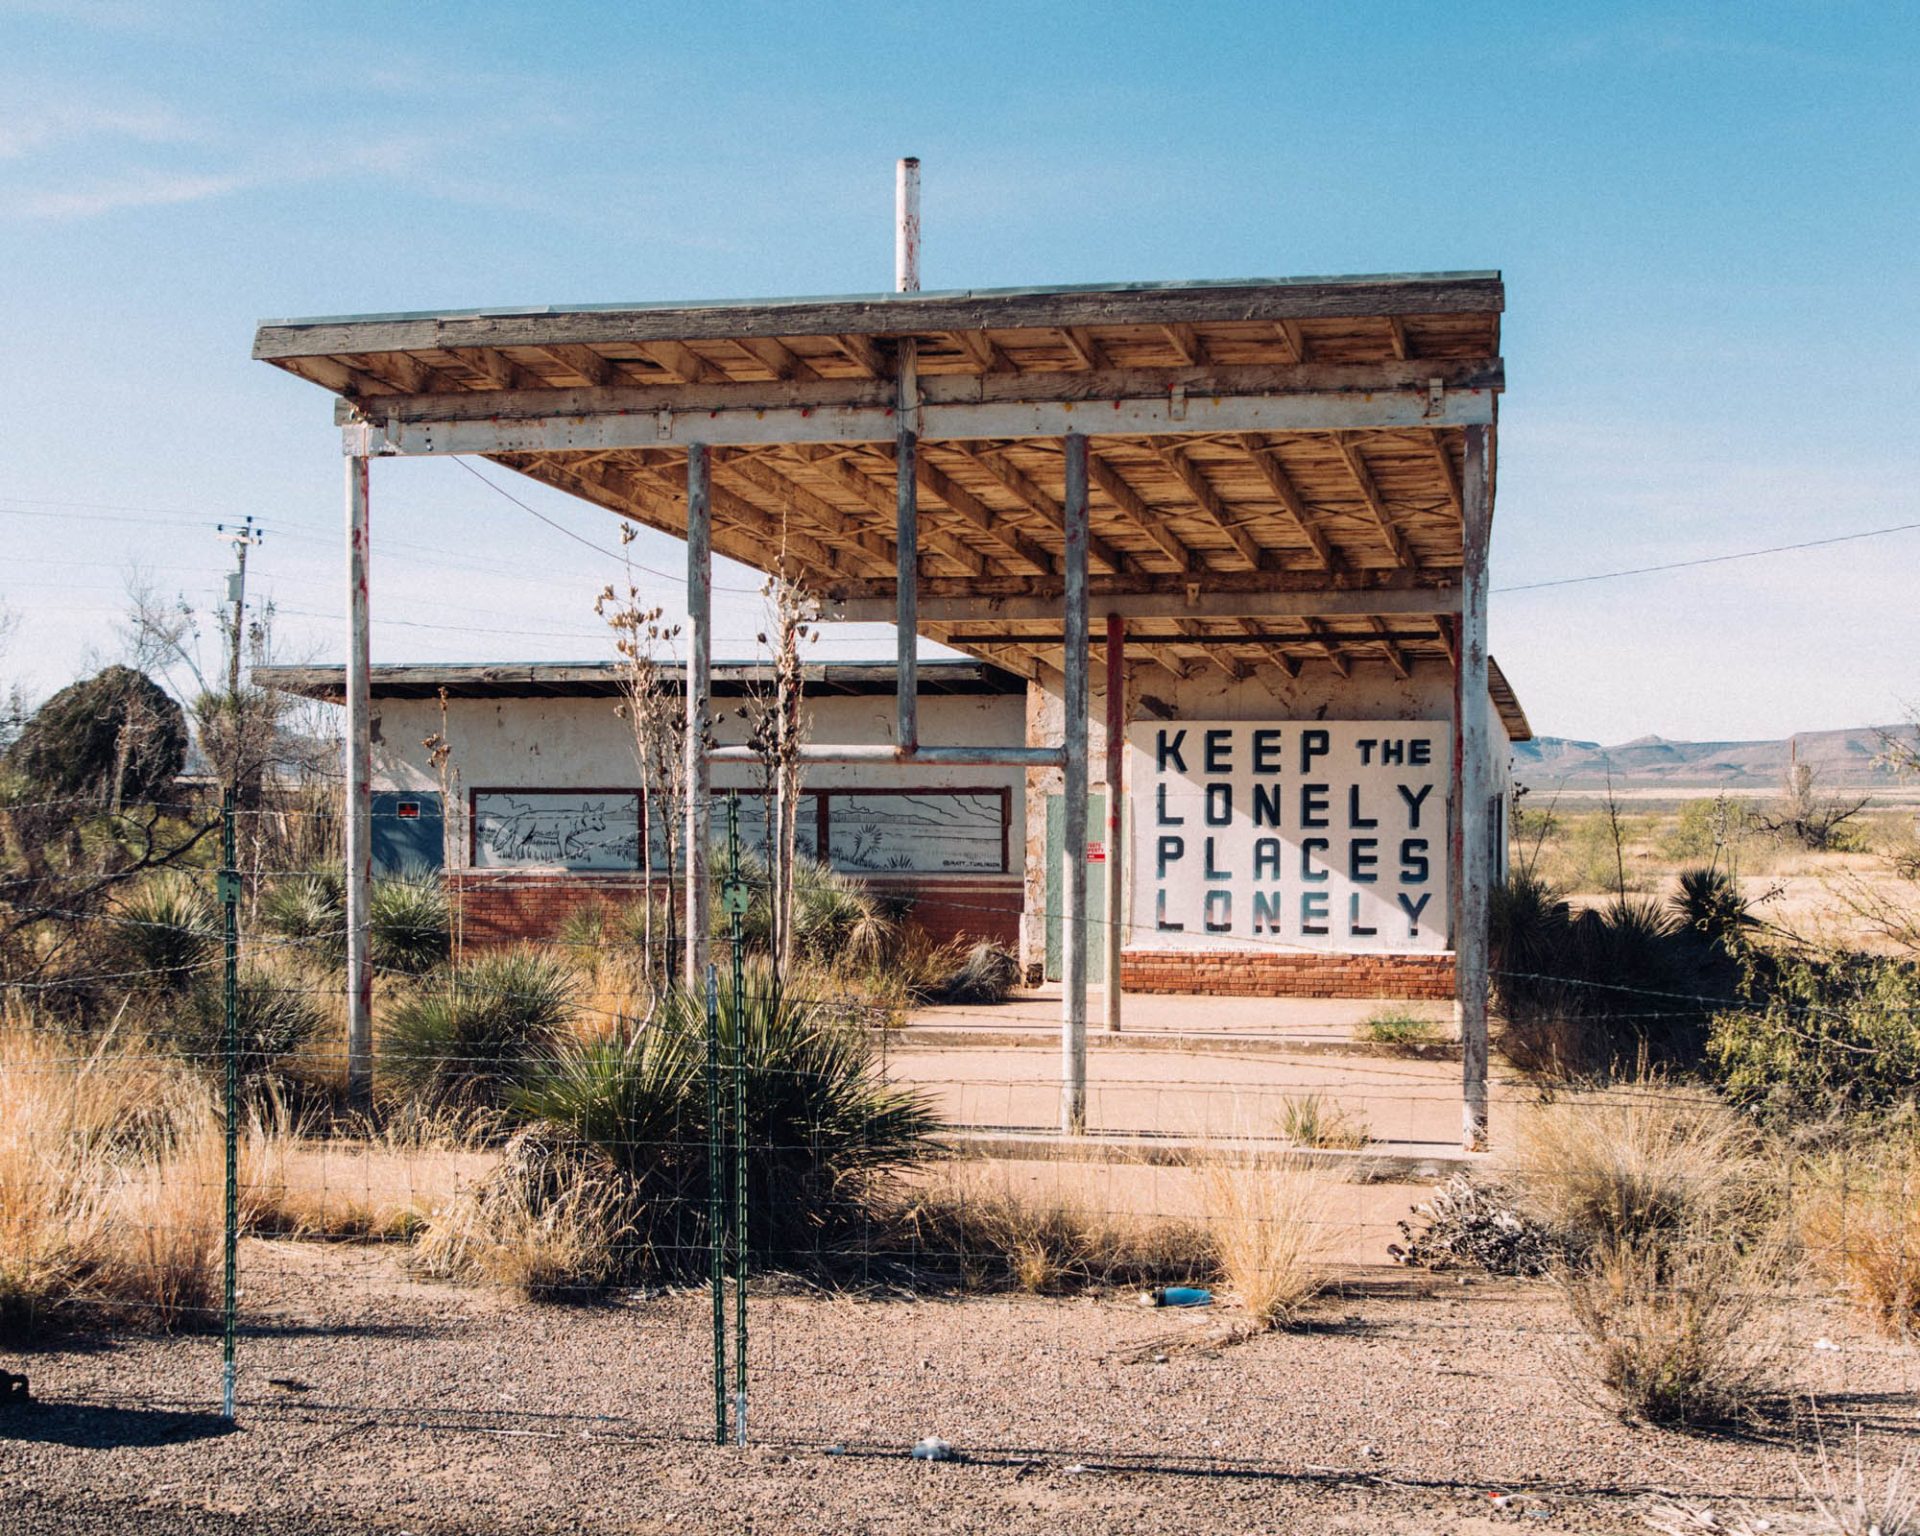 An abandoned gas station in the desert. The pumps are gone and the building is boarded up, with a large sign that reads "Keep the lonely places lonely."